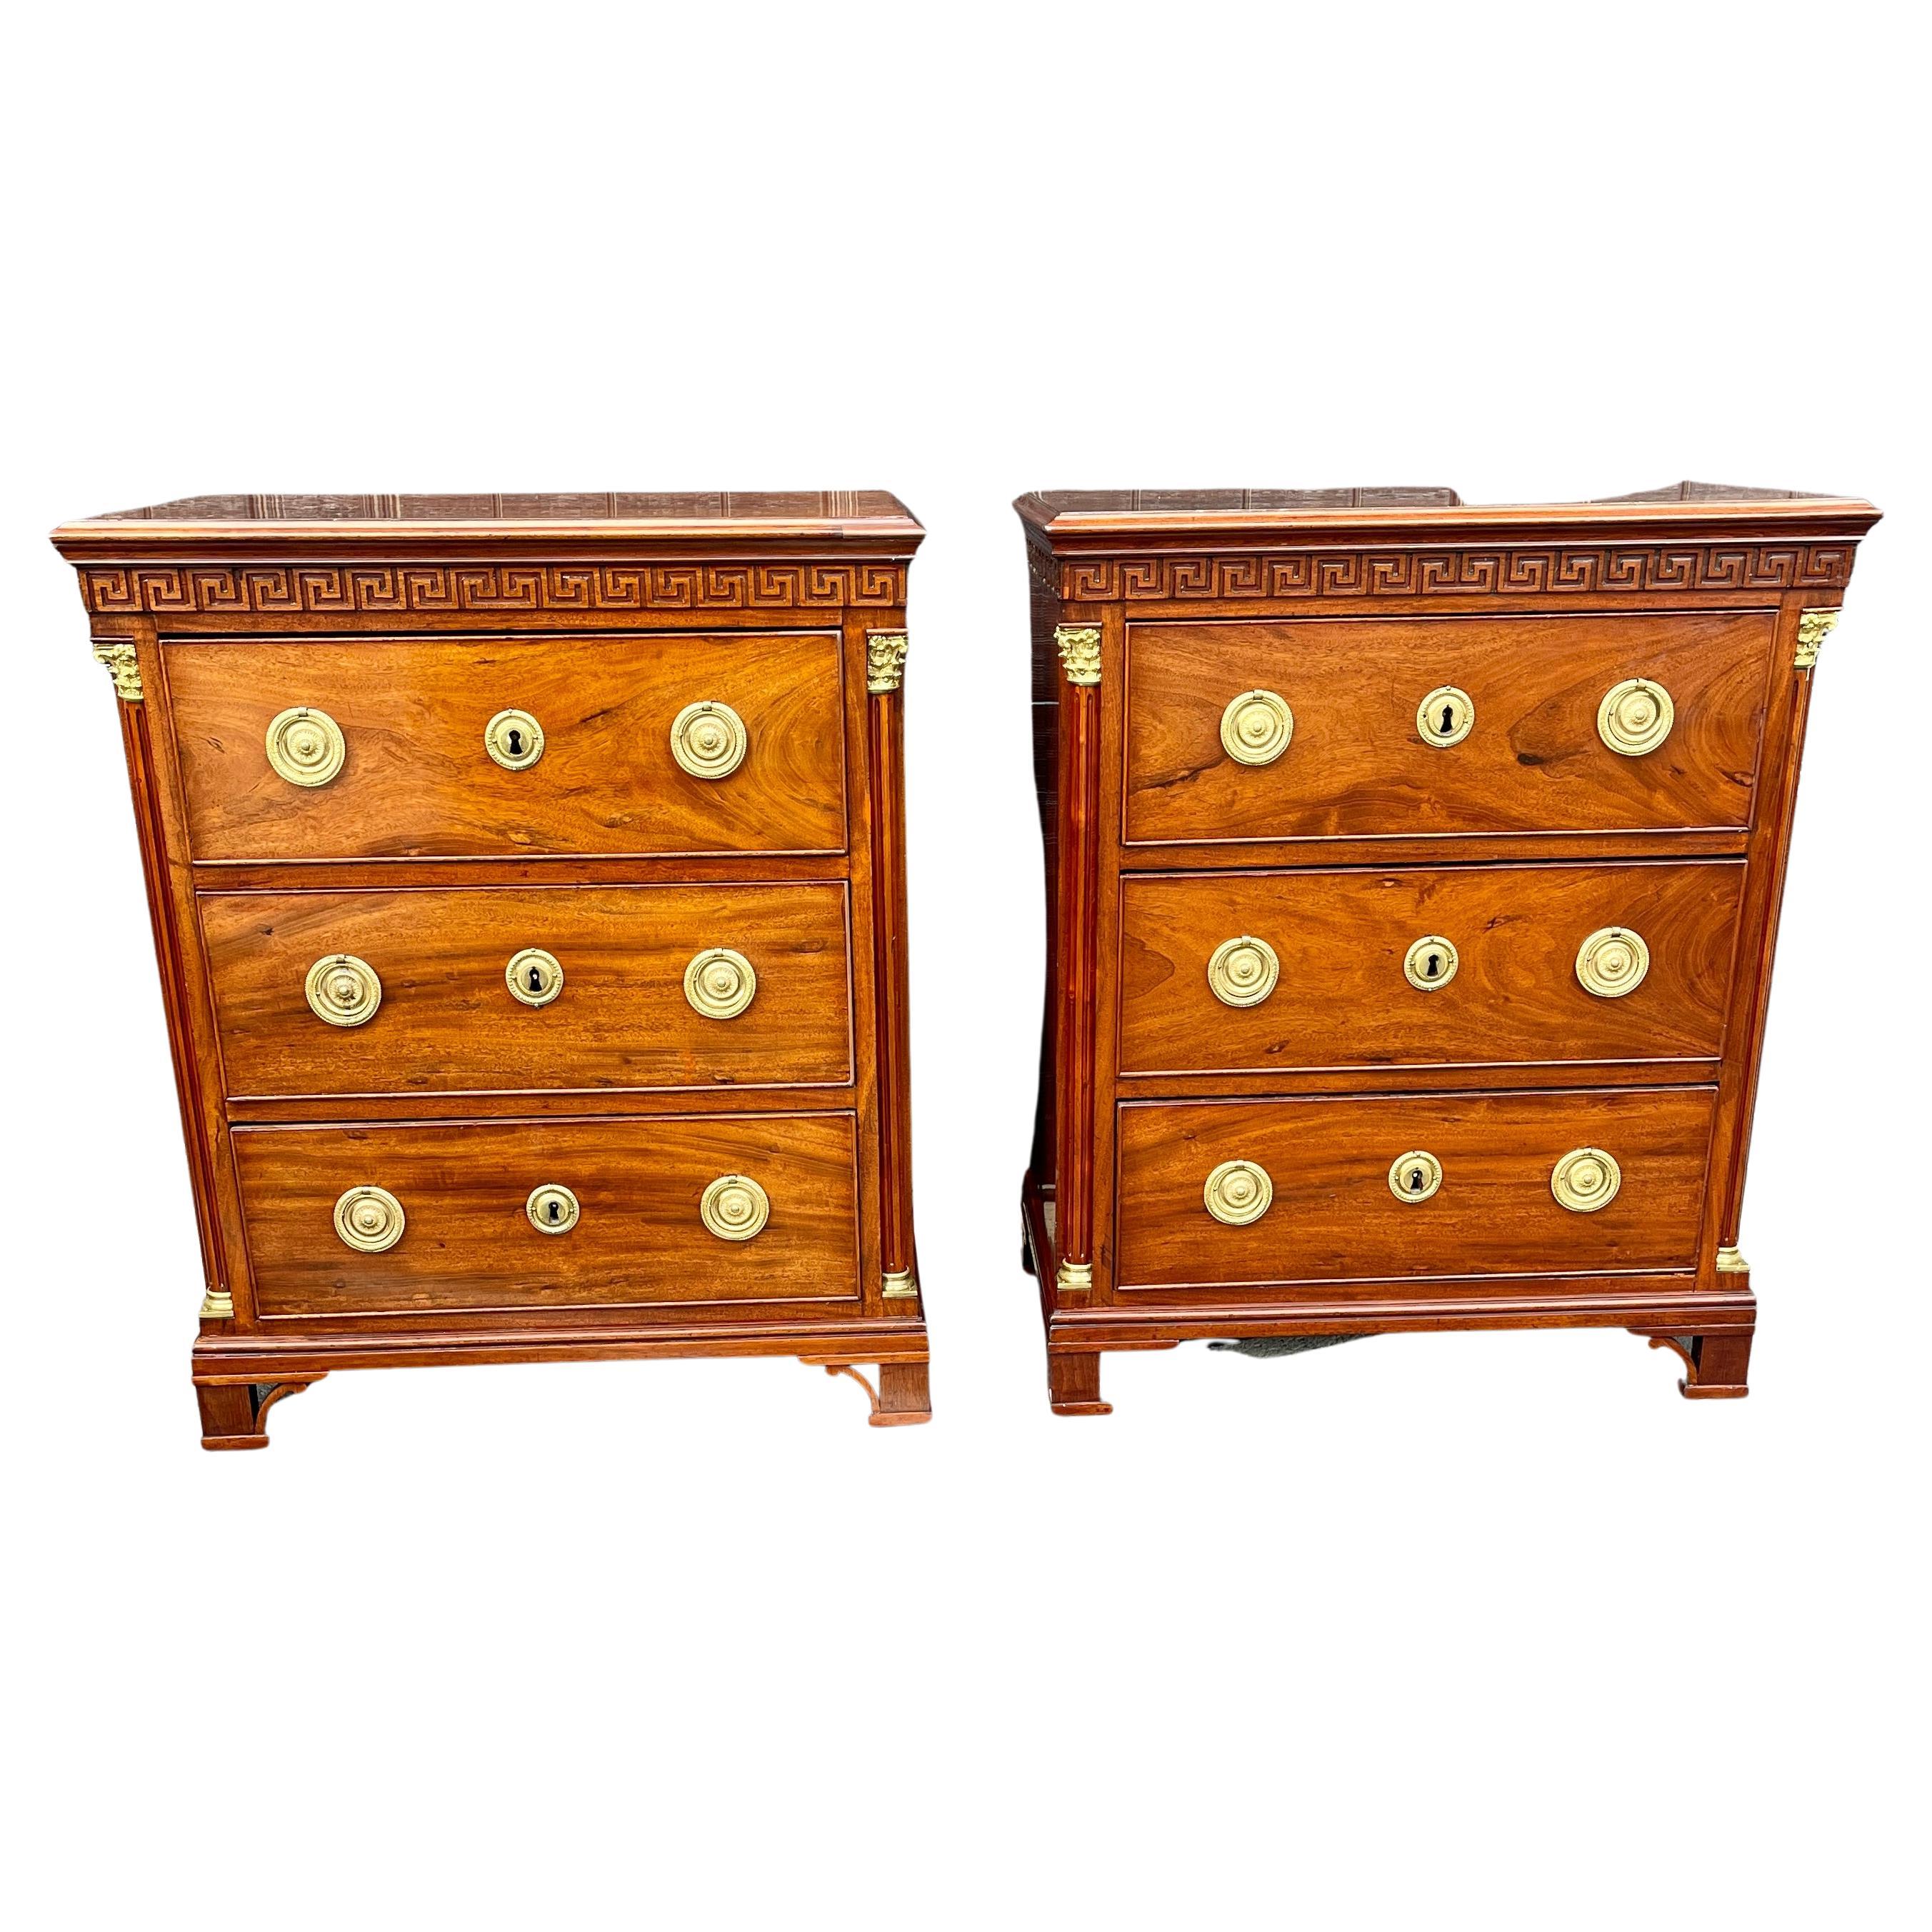 Pair of Period Empire Mahogany and Gilt Chest of Drawers, Denmark, circa 1800 In Good Condition For Sale In Haddonfield, NJ